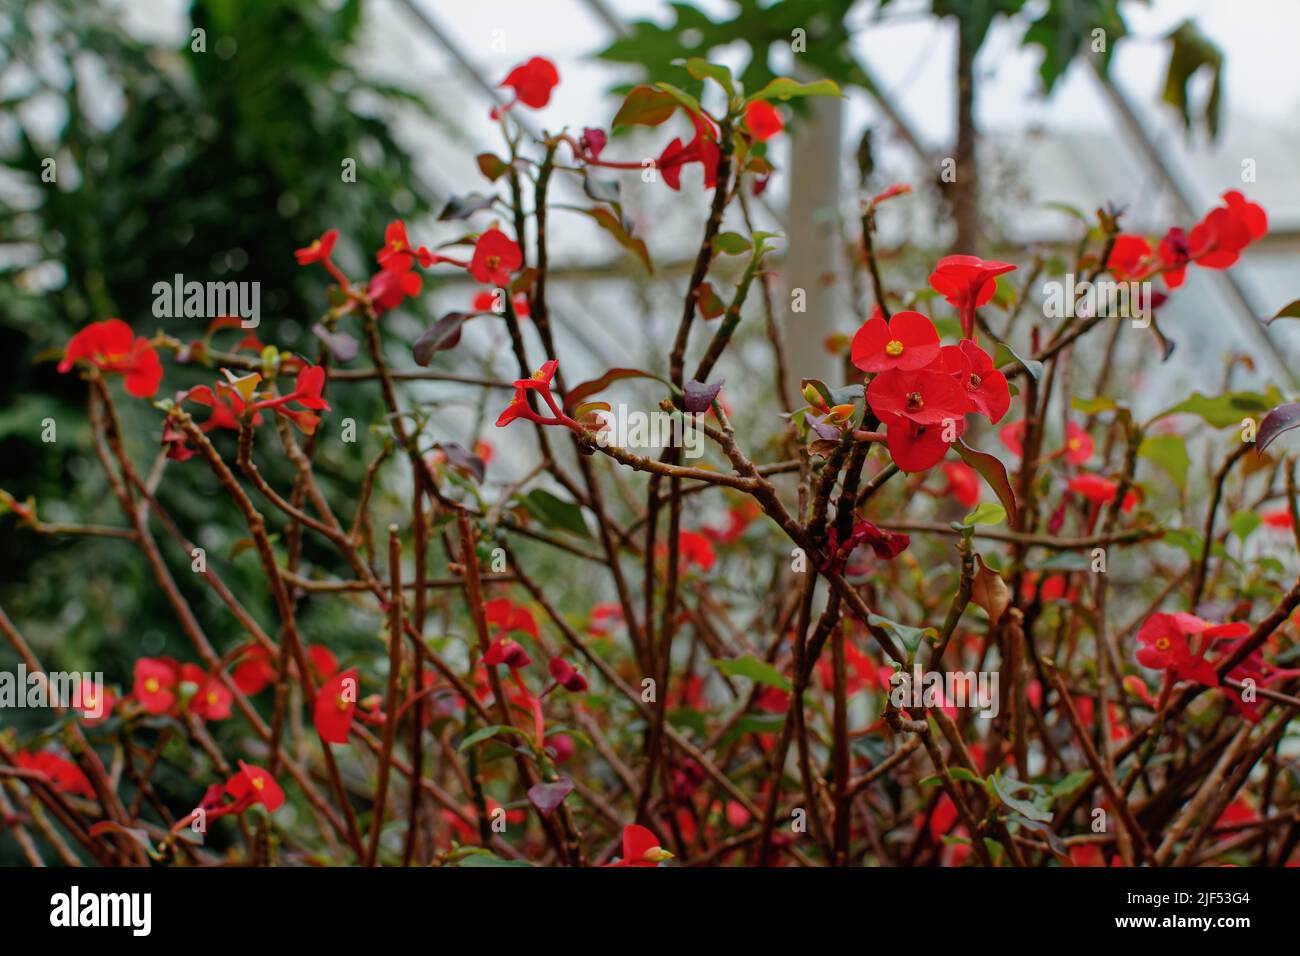 Potted Evening Glory flowers in a greenhouse. Waltham, Massachusetts USA. Stock Photo